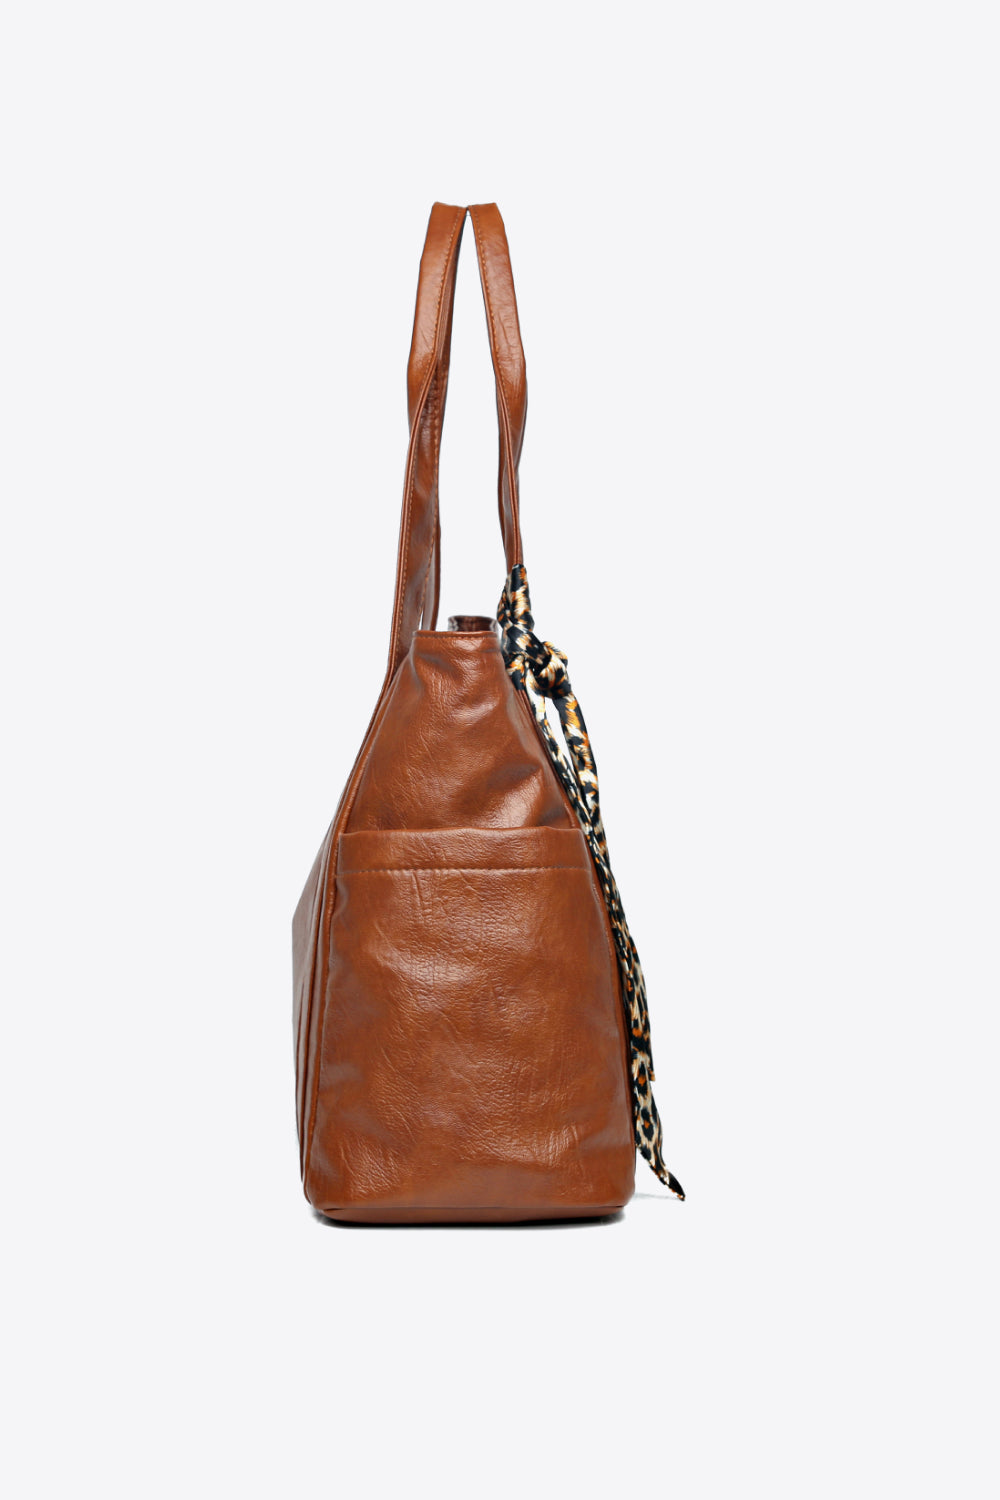 Tied Handbag with Lightweight Construction for Easy Carrying